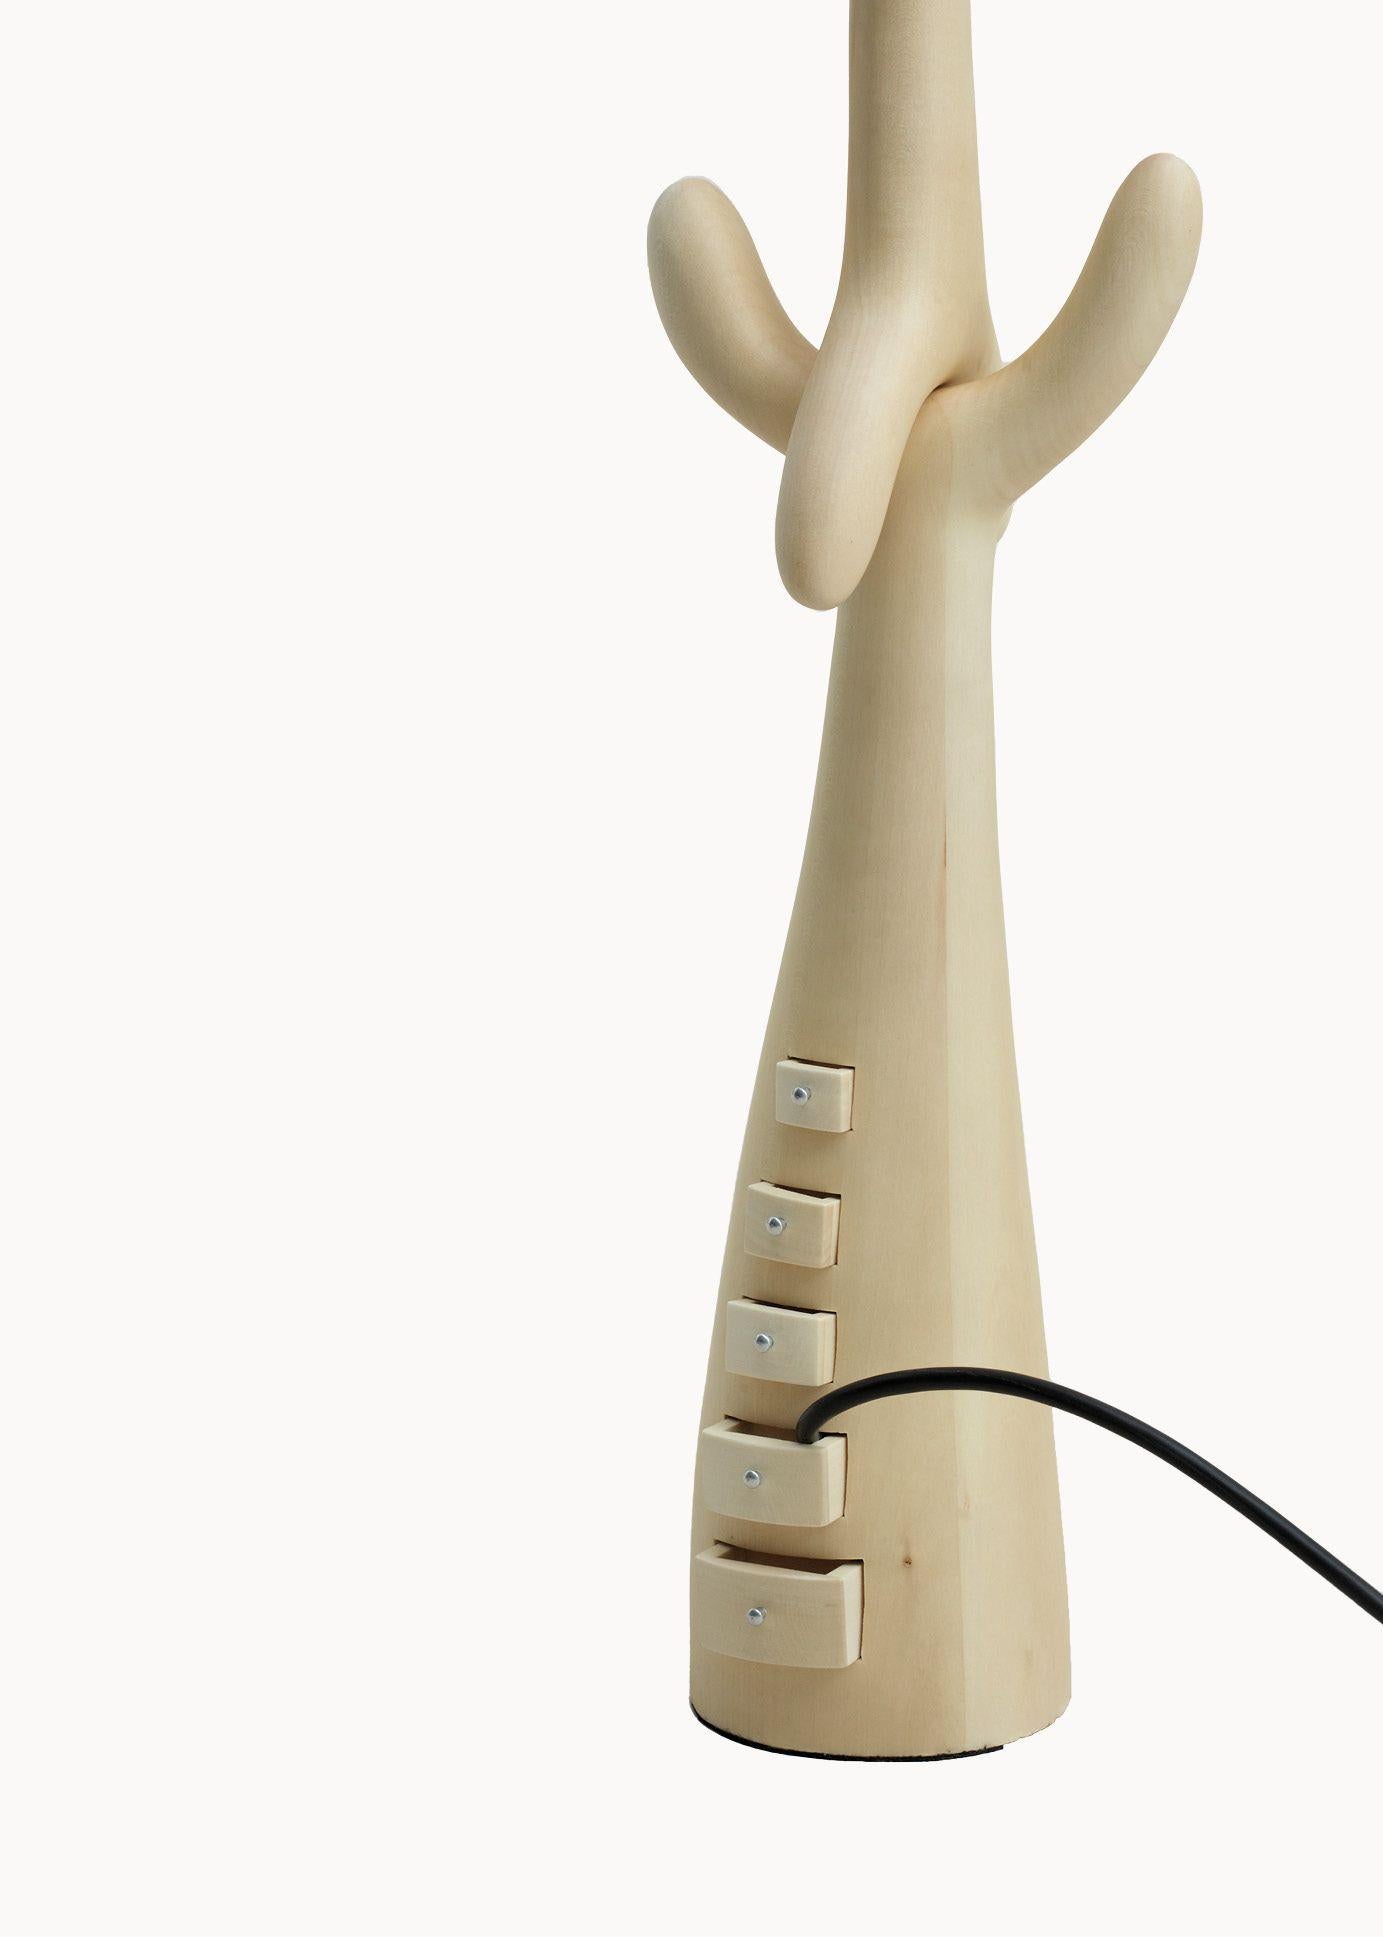 Drawers lamp designed by Dali manufactured by BD.

Carved structure in pale varnished limewood.
Lampshade in beige linen.

Measures: 30 x 30 x 87 H cm

Sculpture-lamp drawers

A standing lamp taken from Dalí’s drawings for Jean Michel Frank. With